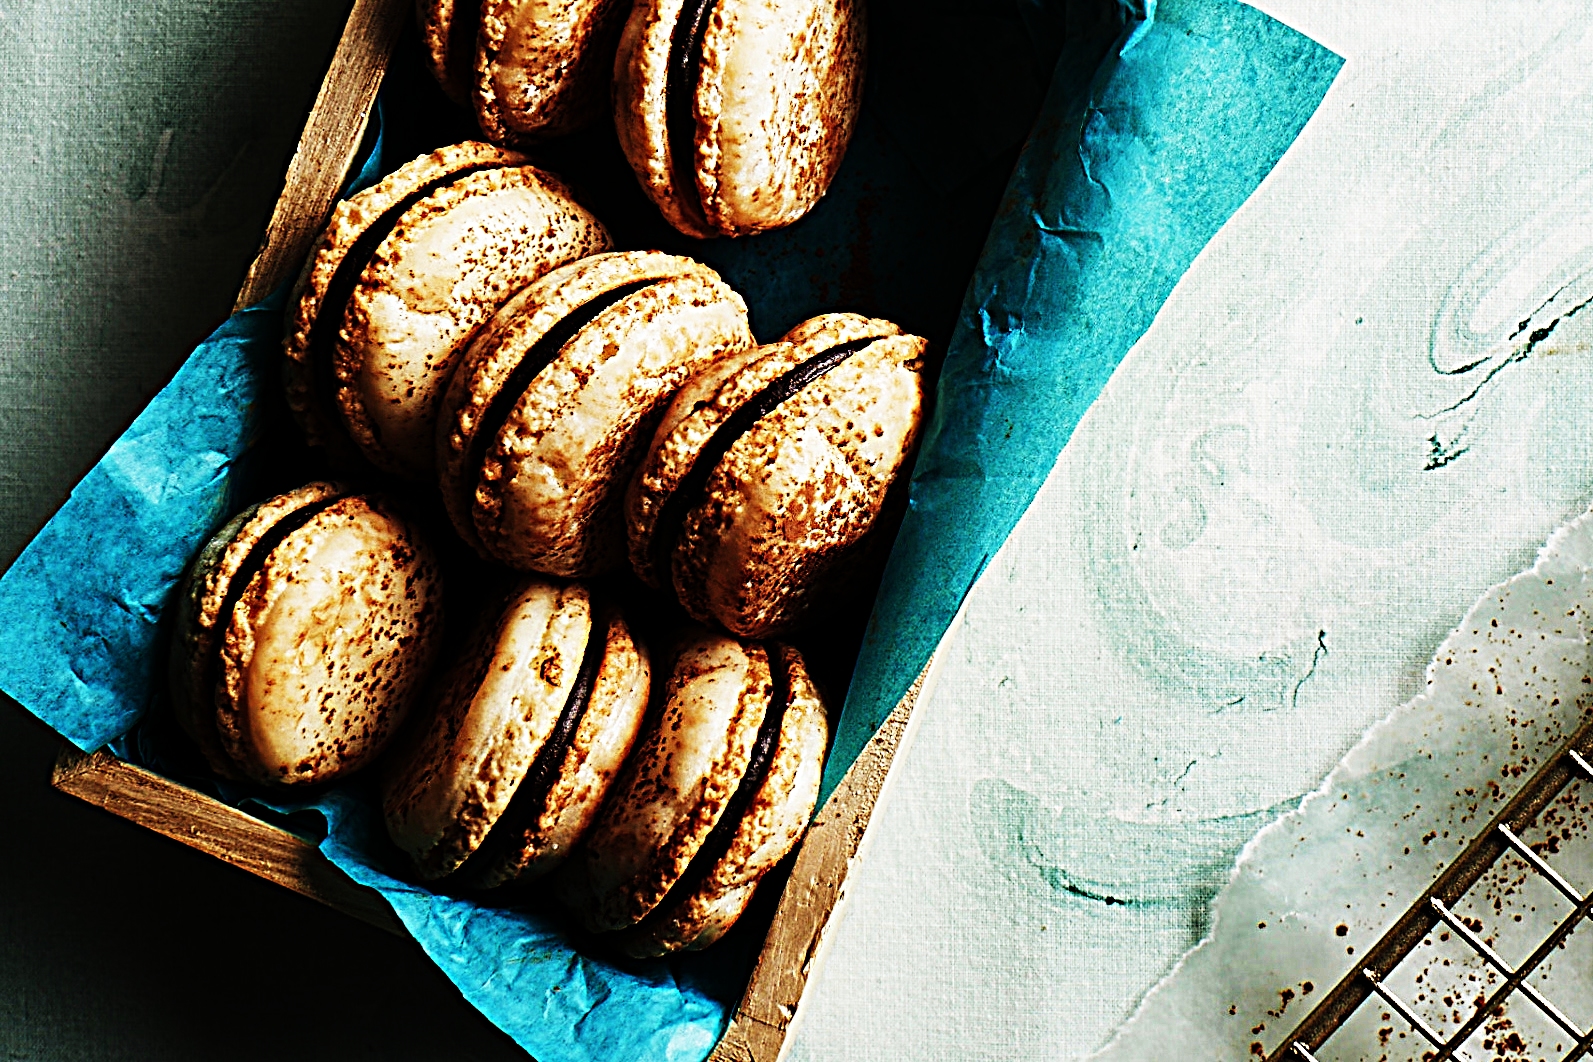 Stupid-Easy Recipe for Almond Macarons with Dark Chocolate Ganache Filling (#1 Top-Rated)